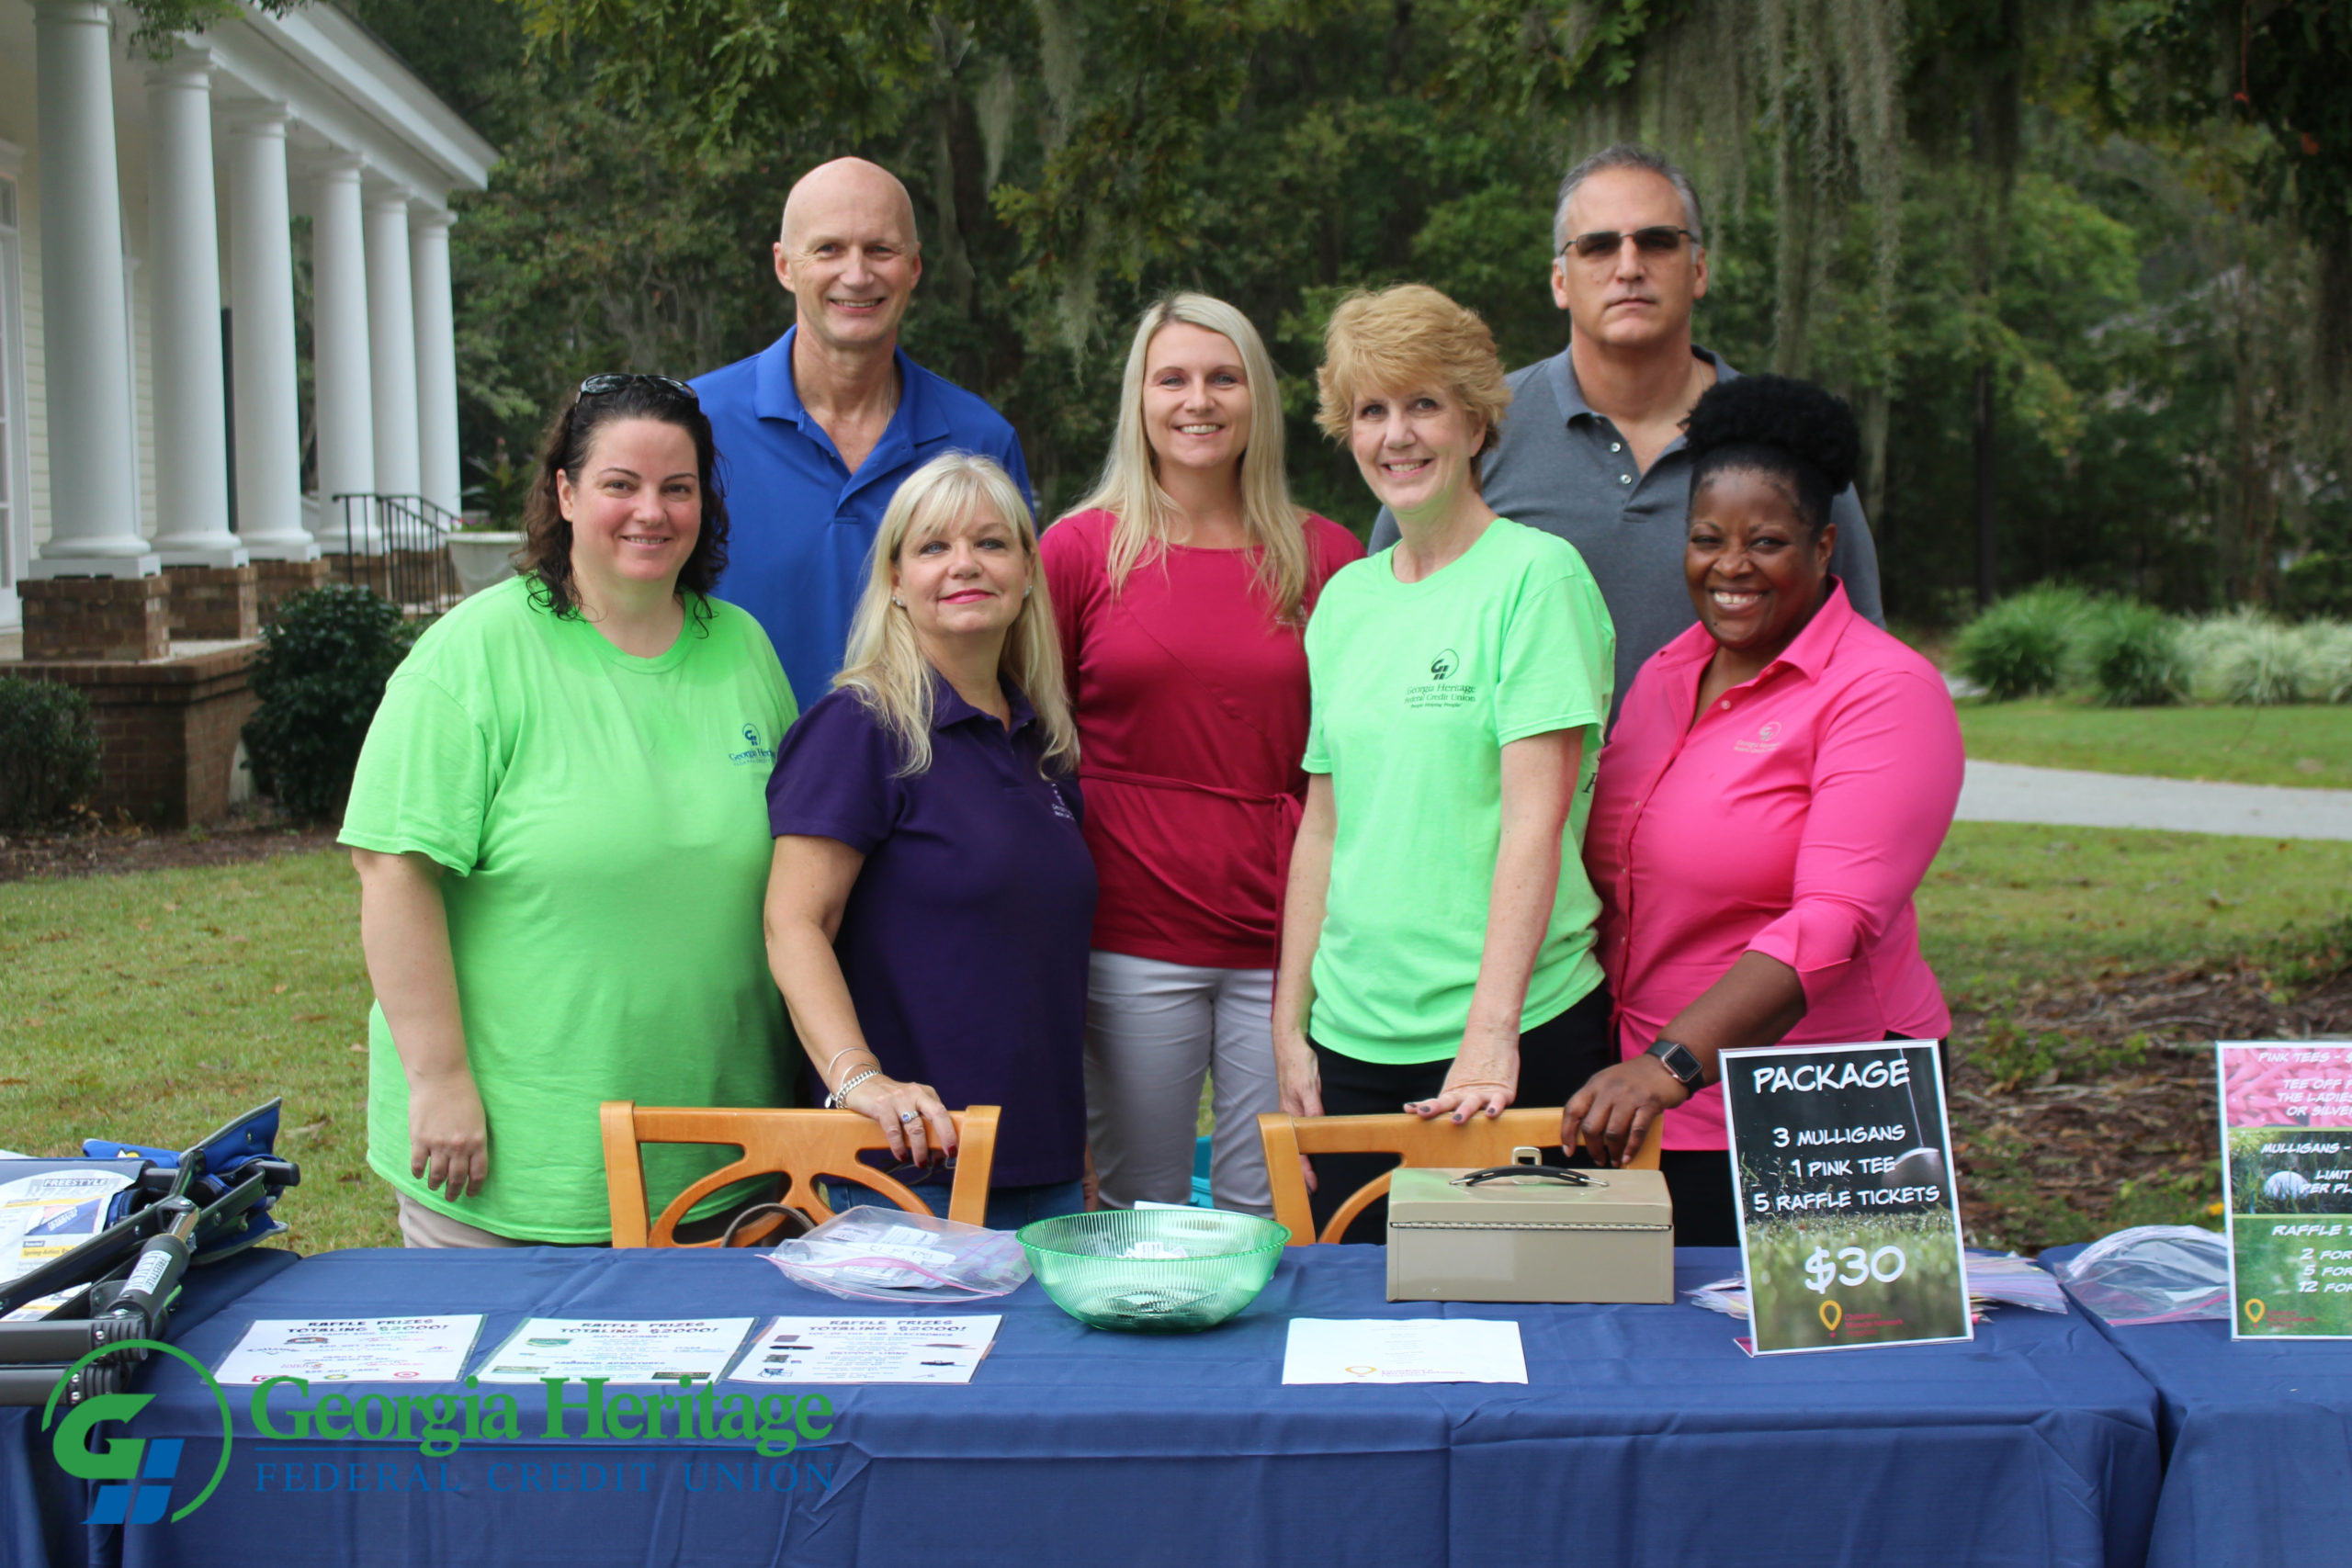 Georgia Heritage Federal Credit Union recently raised $10,000 for local children’s hospitals while treating area first responders to a well-deserved day of golf in Savannah at the annual Chip in Fore Children’s Miracle Network Golf Tournament.